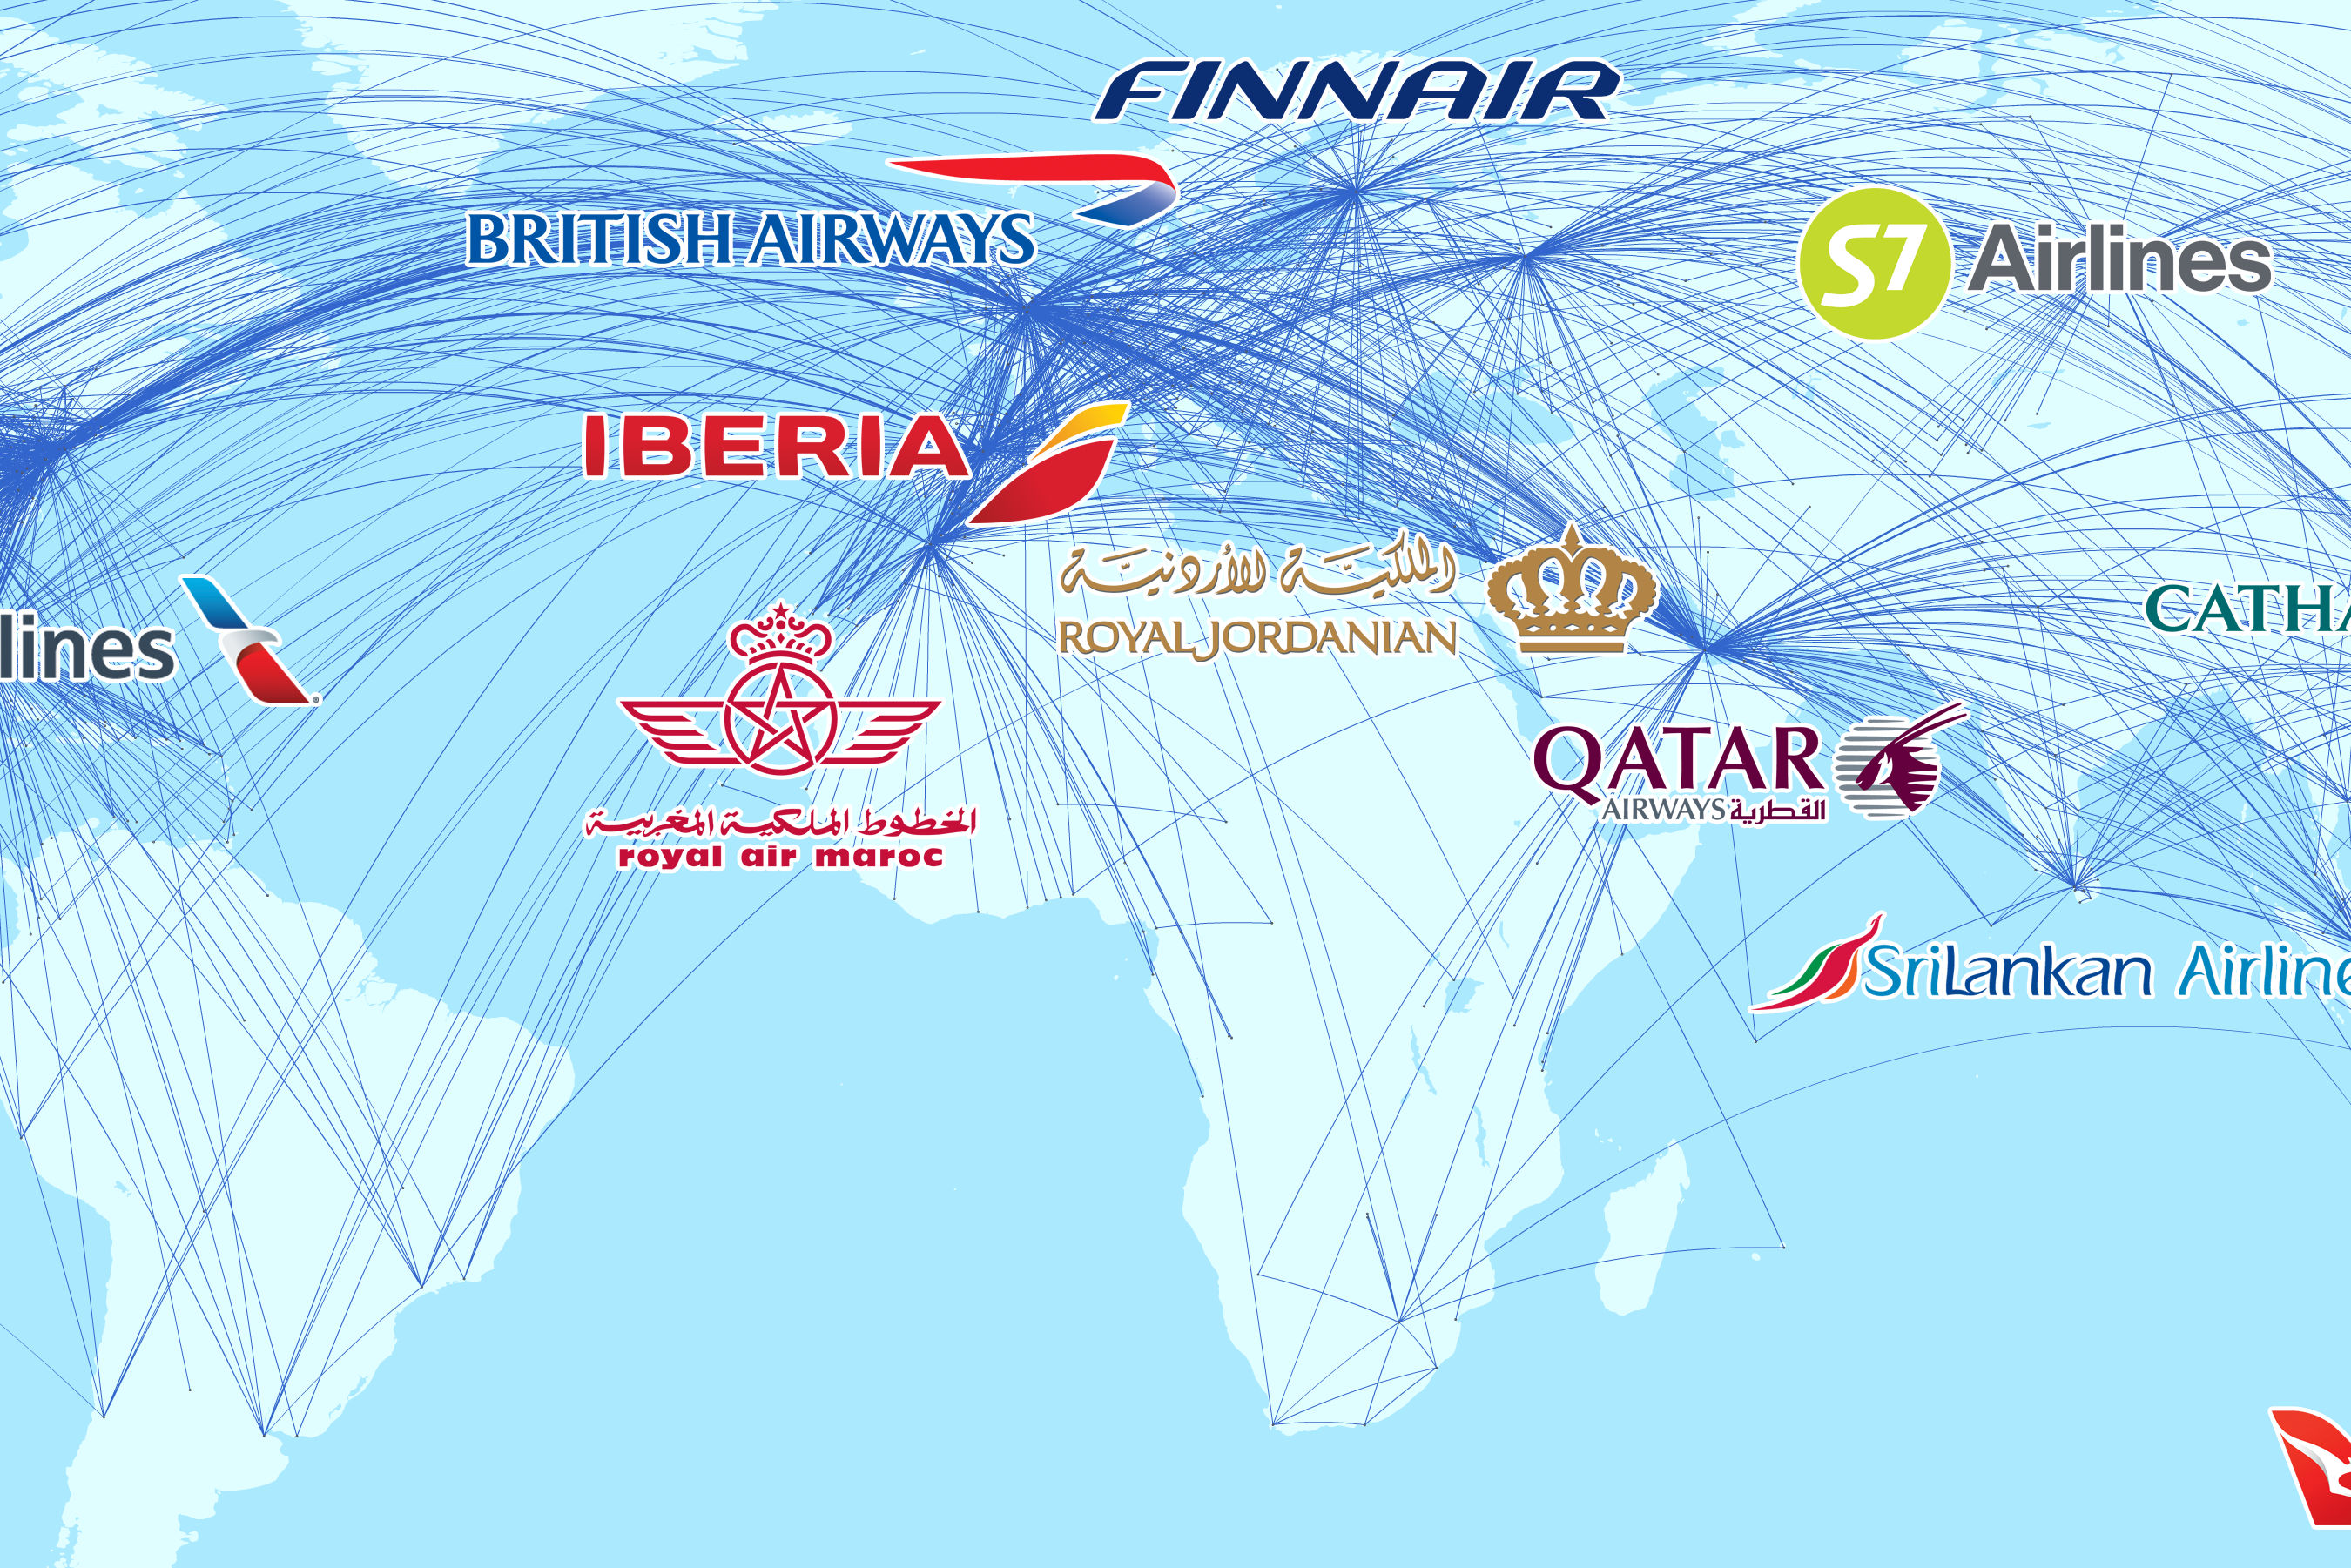 oneworld provides a global network of flights across 14 world-class airlines. With its full membership, Alaska Airlines will add seven new airline partners and enhance its six existing partnerships.